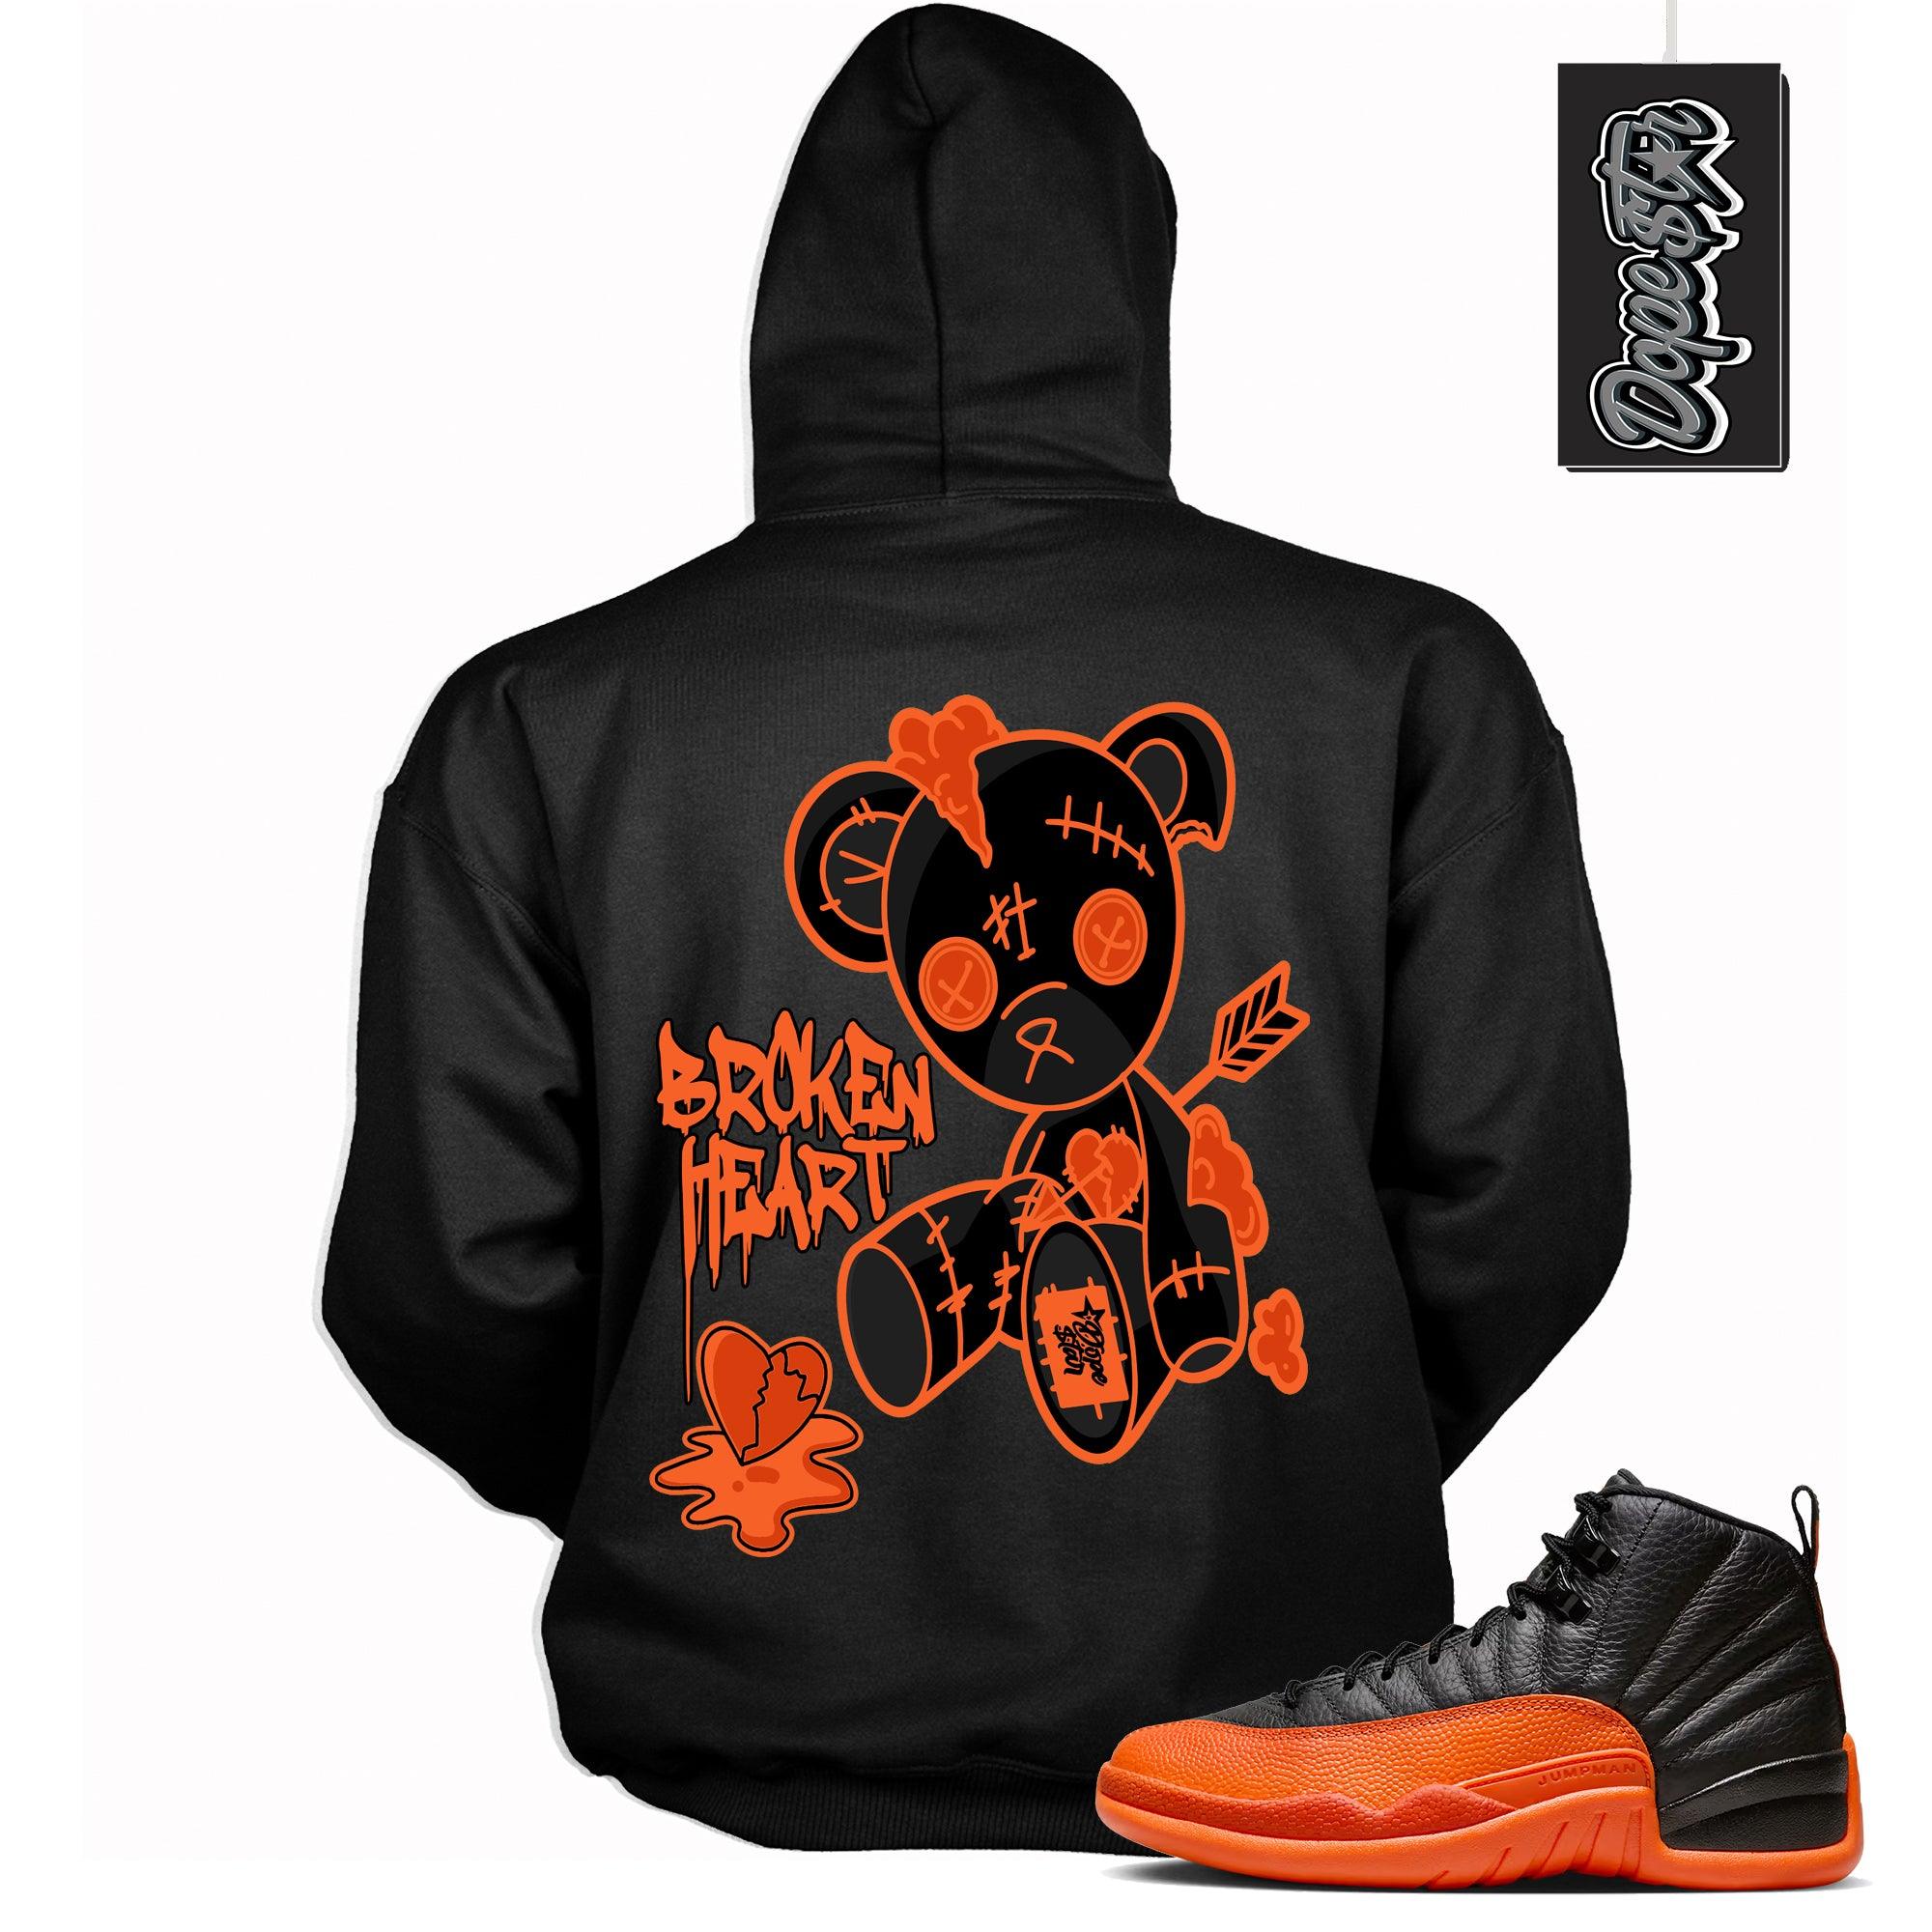 Cool Black Graphic Hoodie with “ Broken Heart Bear “ print, that perfectly matches Air Jordan 12 Retro WNBA All-Star Brilliant Orange  sneakers